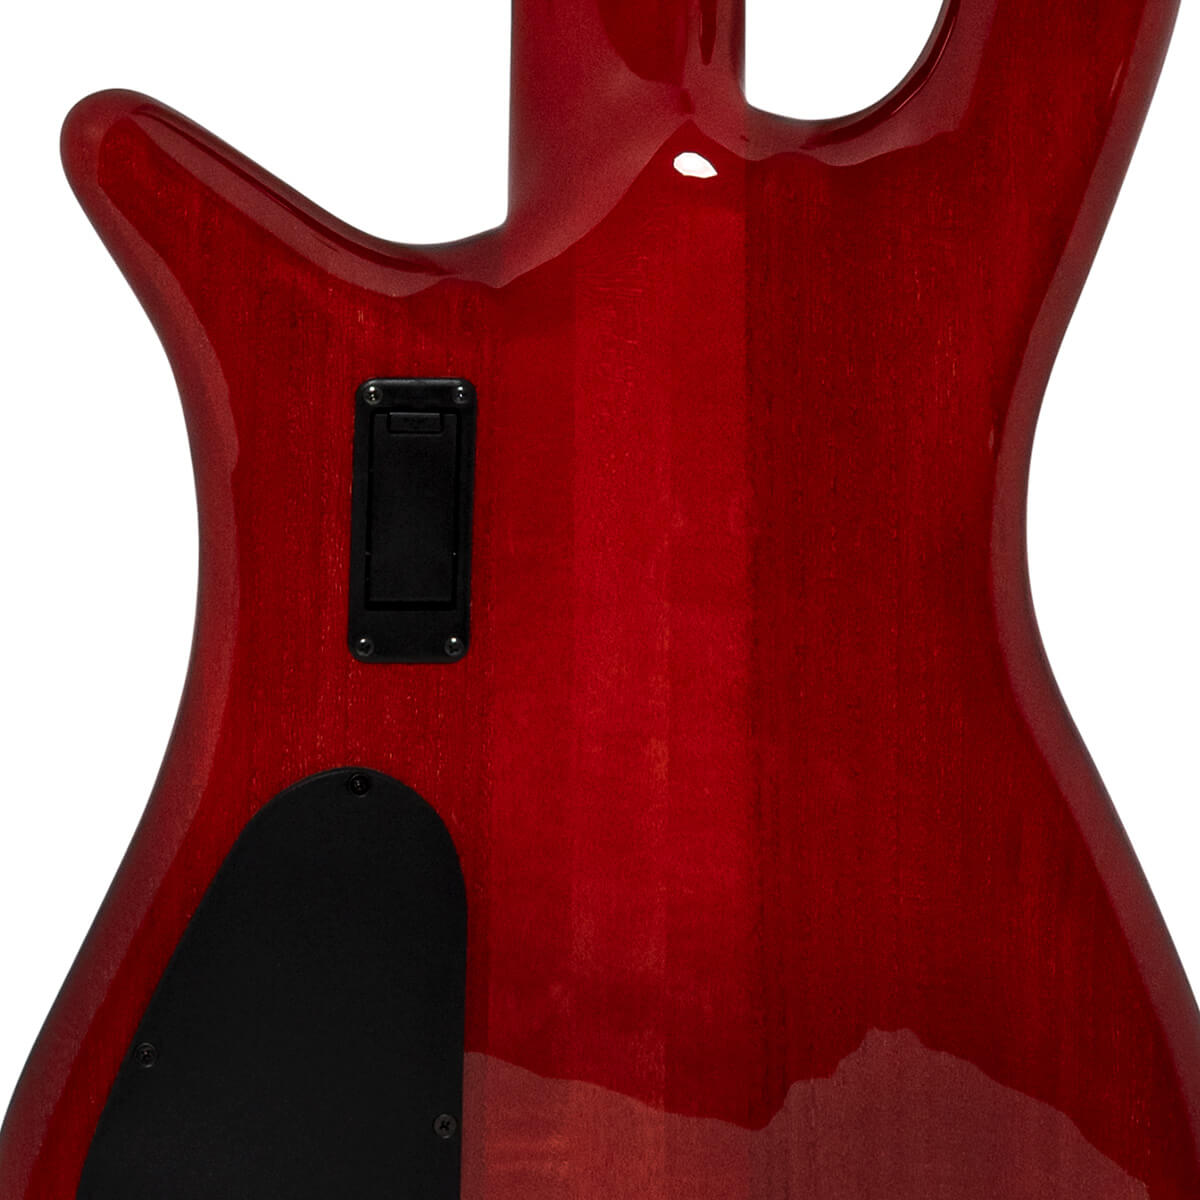 Spector Rudy Sarzo Lt4 Euro Signature Rw - Scarlett Red Gloss - Solid body electric bass - Variation 3